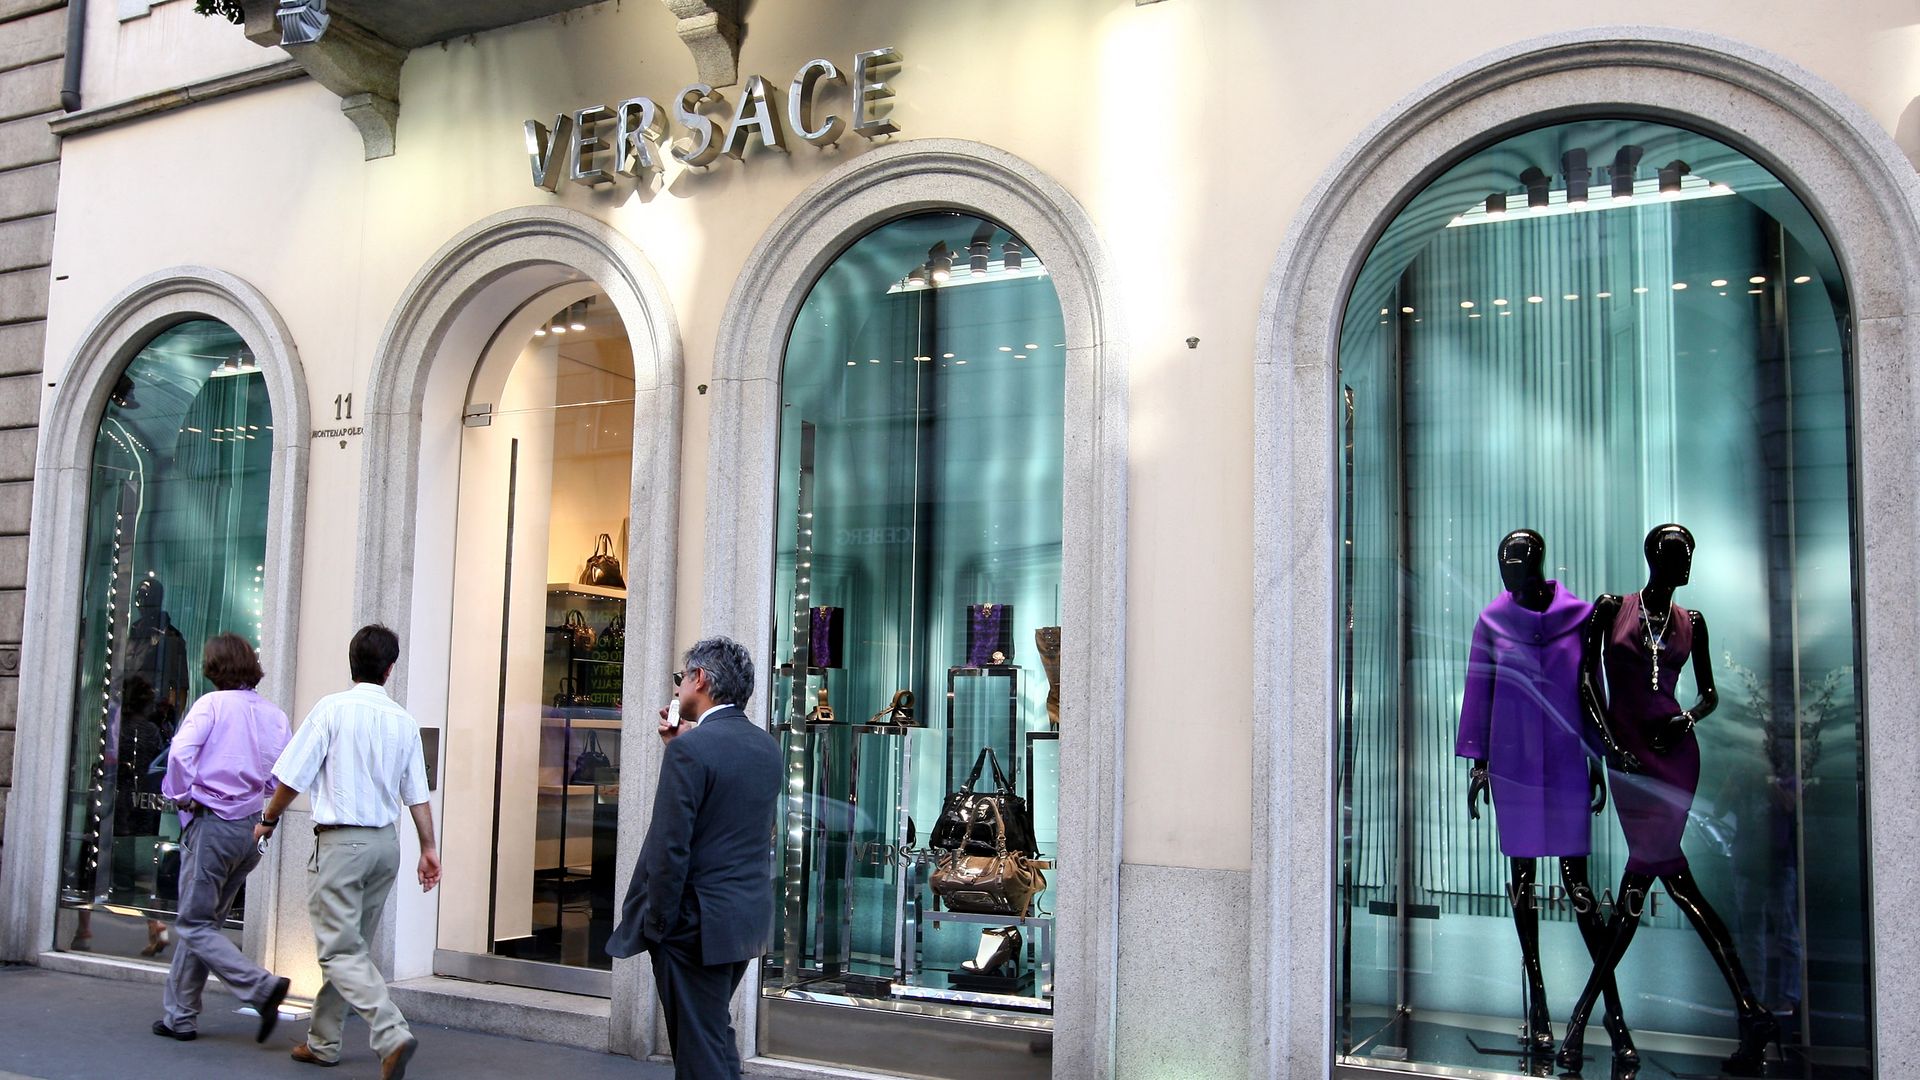 Outside of Versace store.